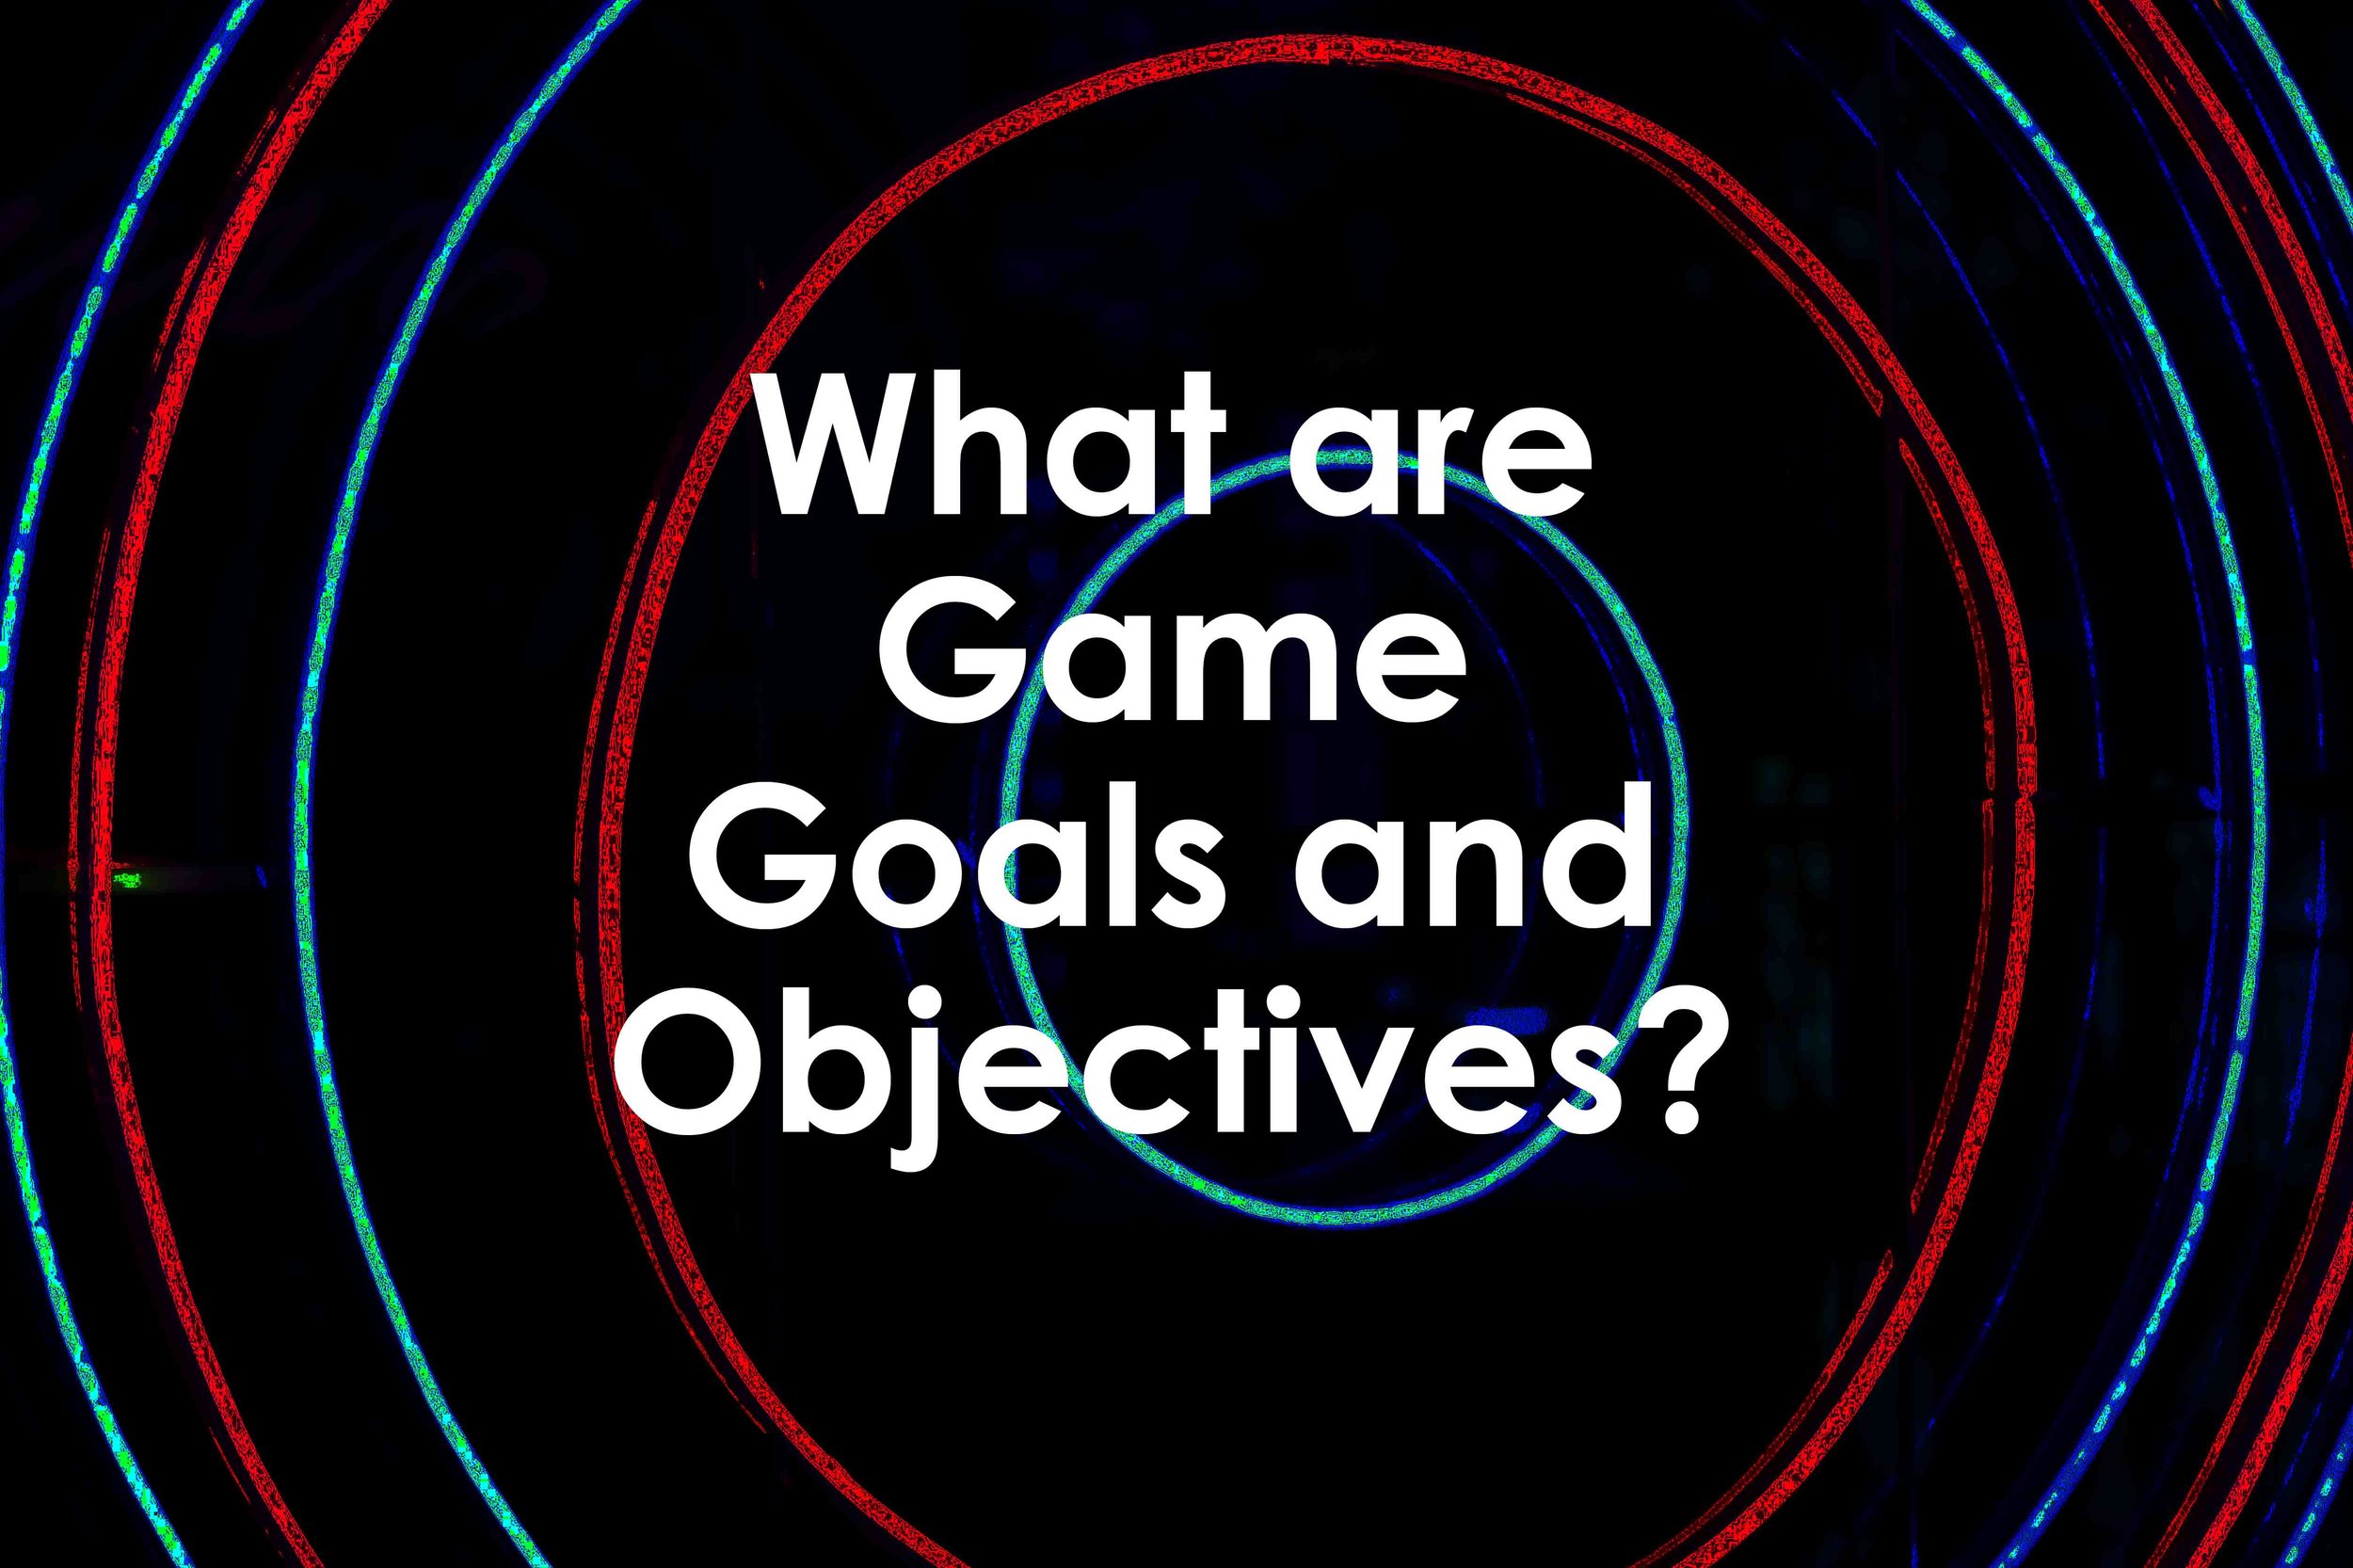 What are Game Goals and Objectives? — University XP